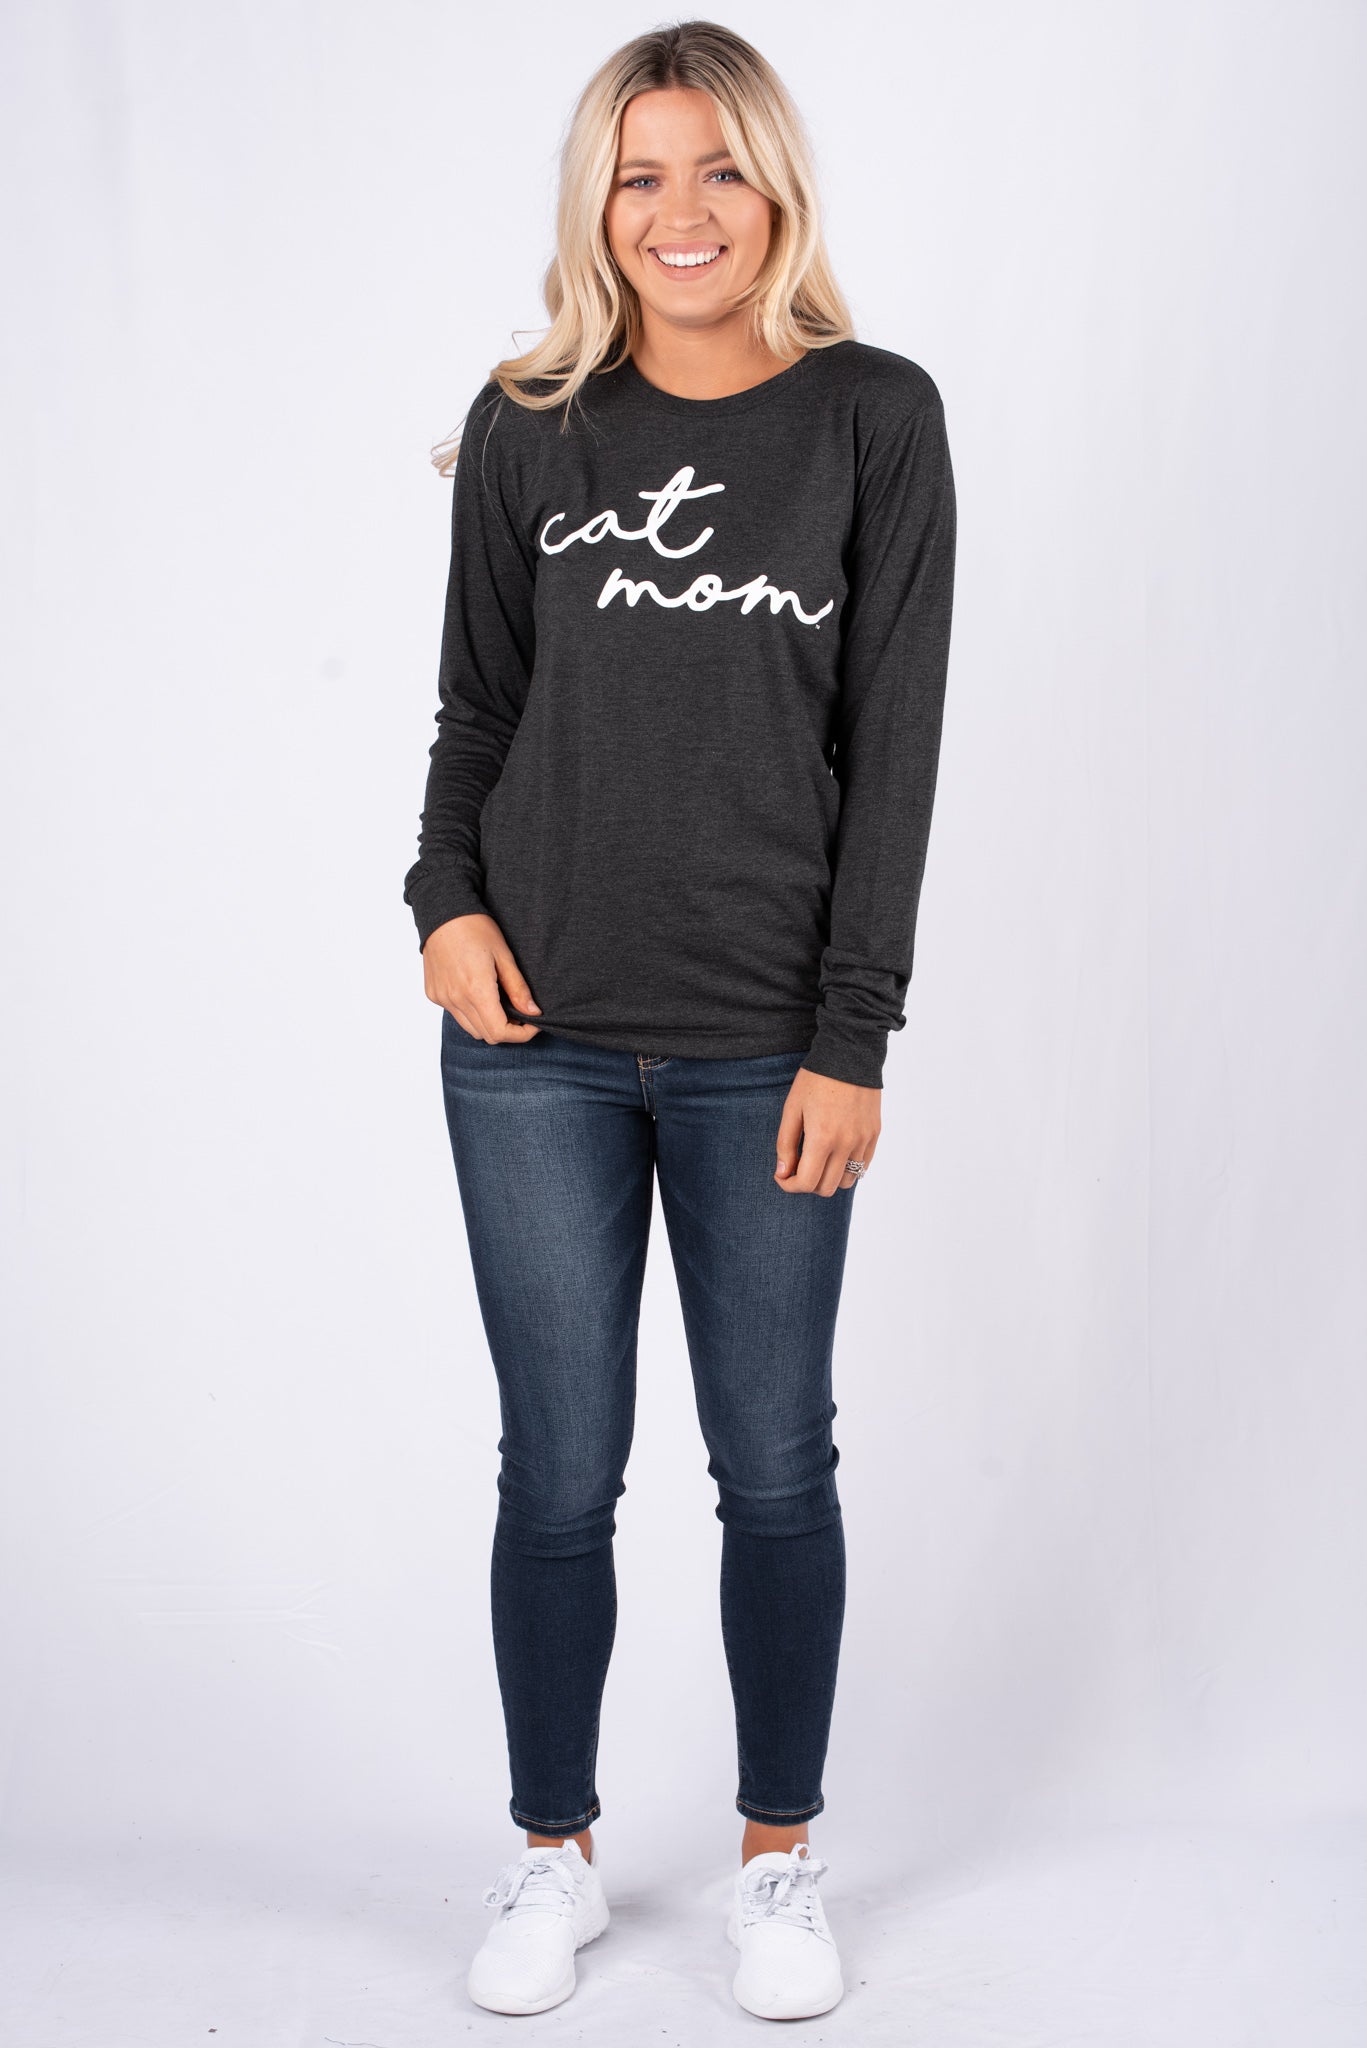 Cat Mom large pride script unisex long sleeve t-shirt charcoal - Trendy T-shirts - Cute Graphic Tee Fashion at Lush Fashion Lounge Boutique in Oklahoma